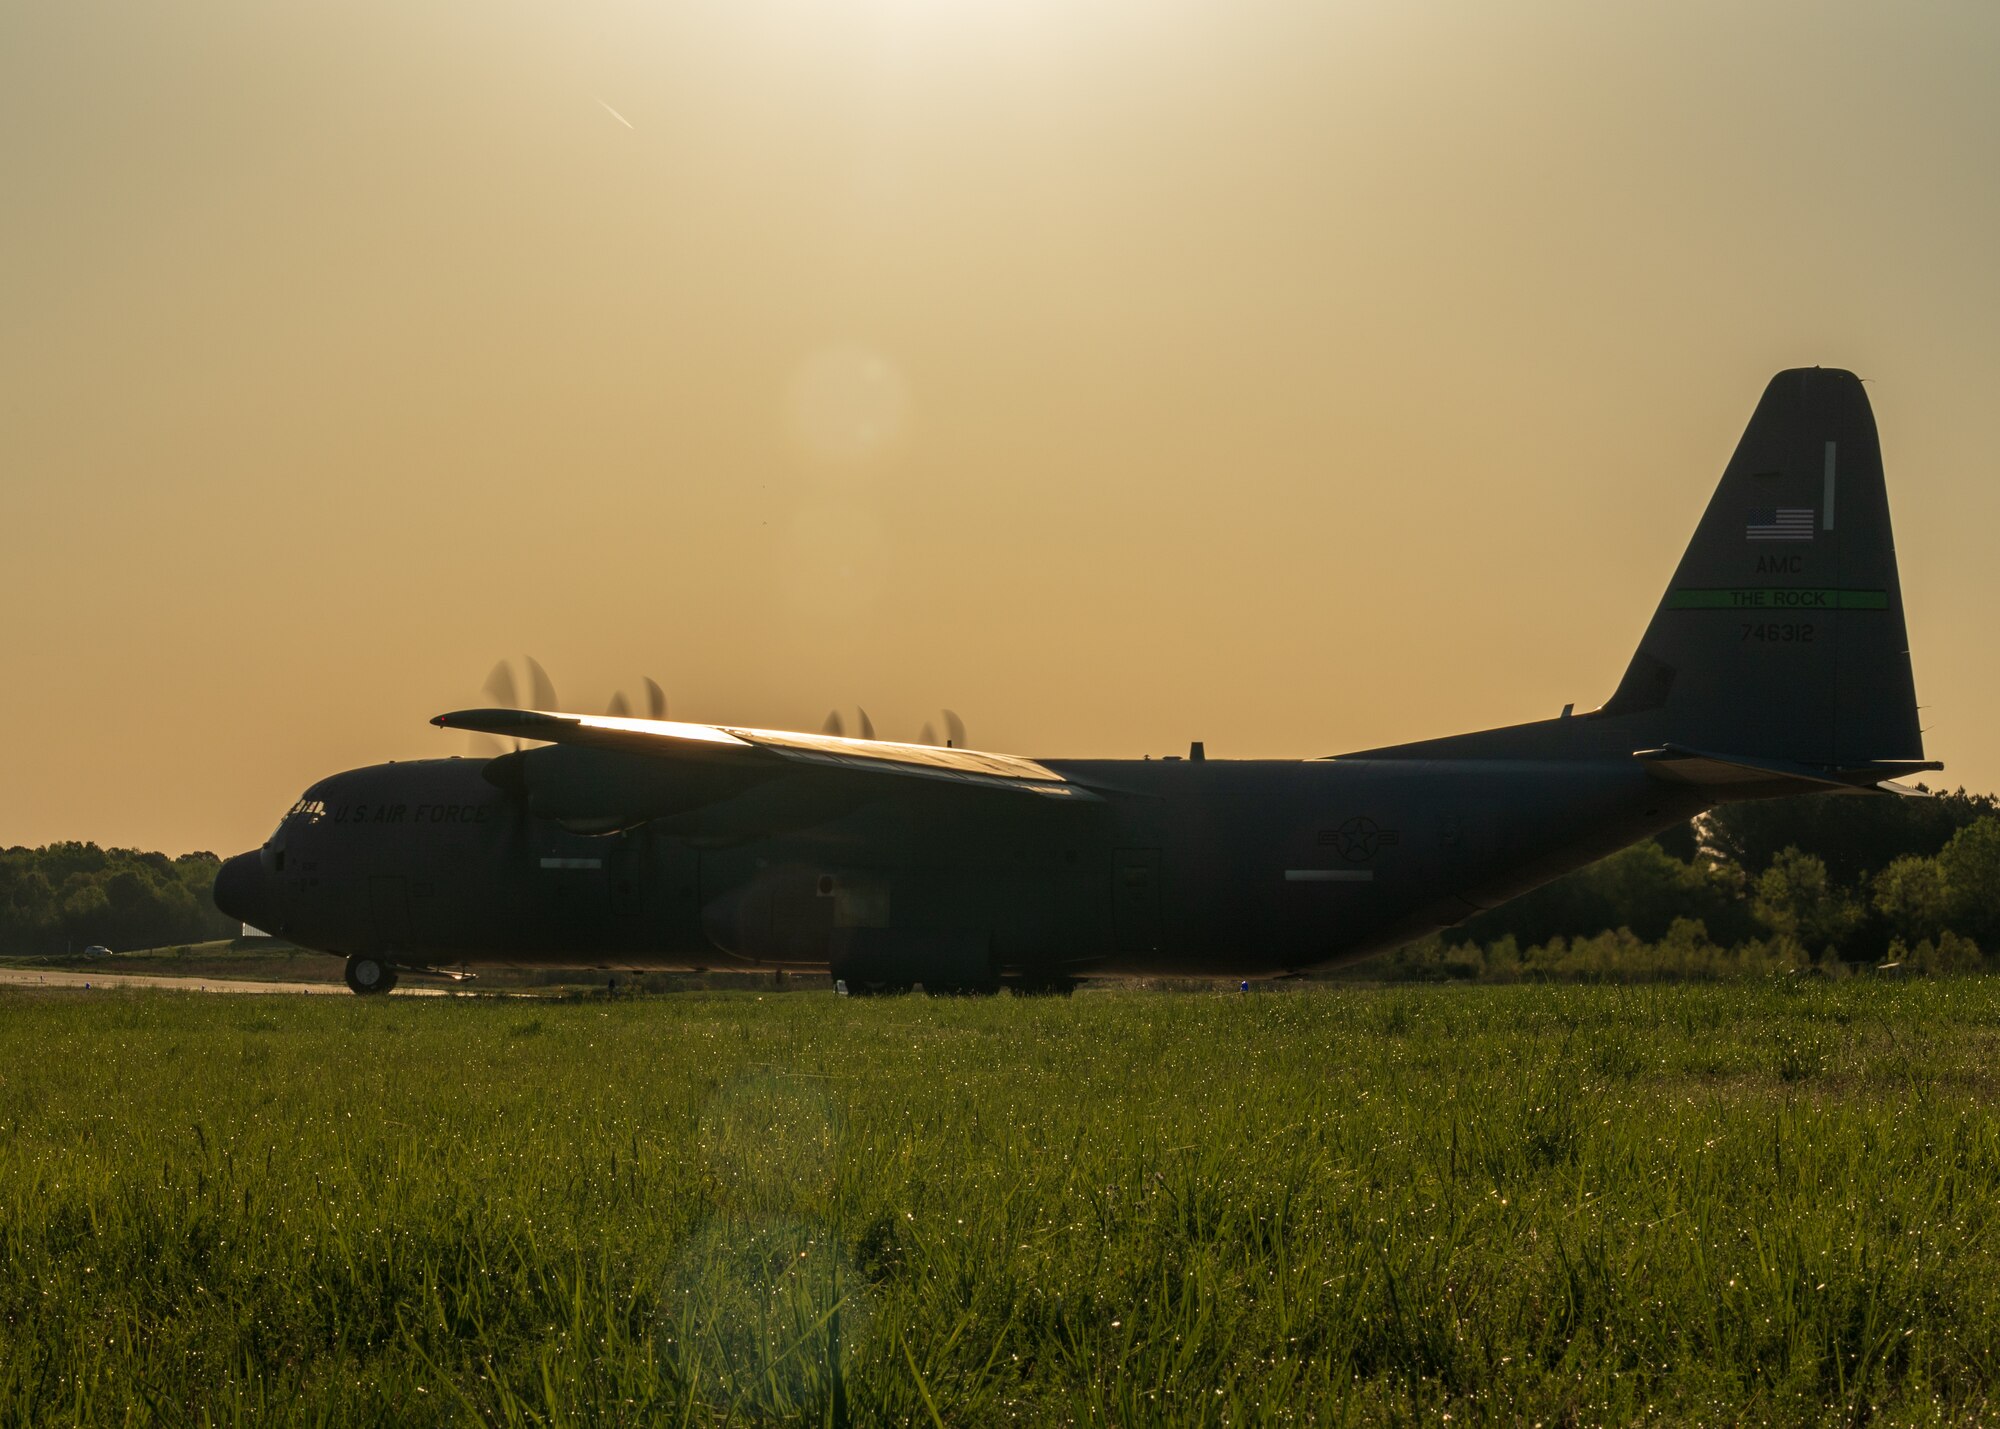 A U.S. Air Force C-130J Super Hercules lines up on the taxi way as part of an 11-ship formation from Little Rock Air Force Base, Ark., April 15. 2021. The elephant walk quickly launched combat airlift to support an U.S. Army Joint Readiness Training event. (U.S. Air Force photo by Maj. Ashley Walker)